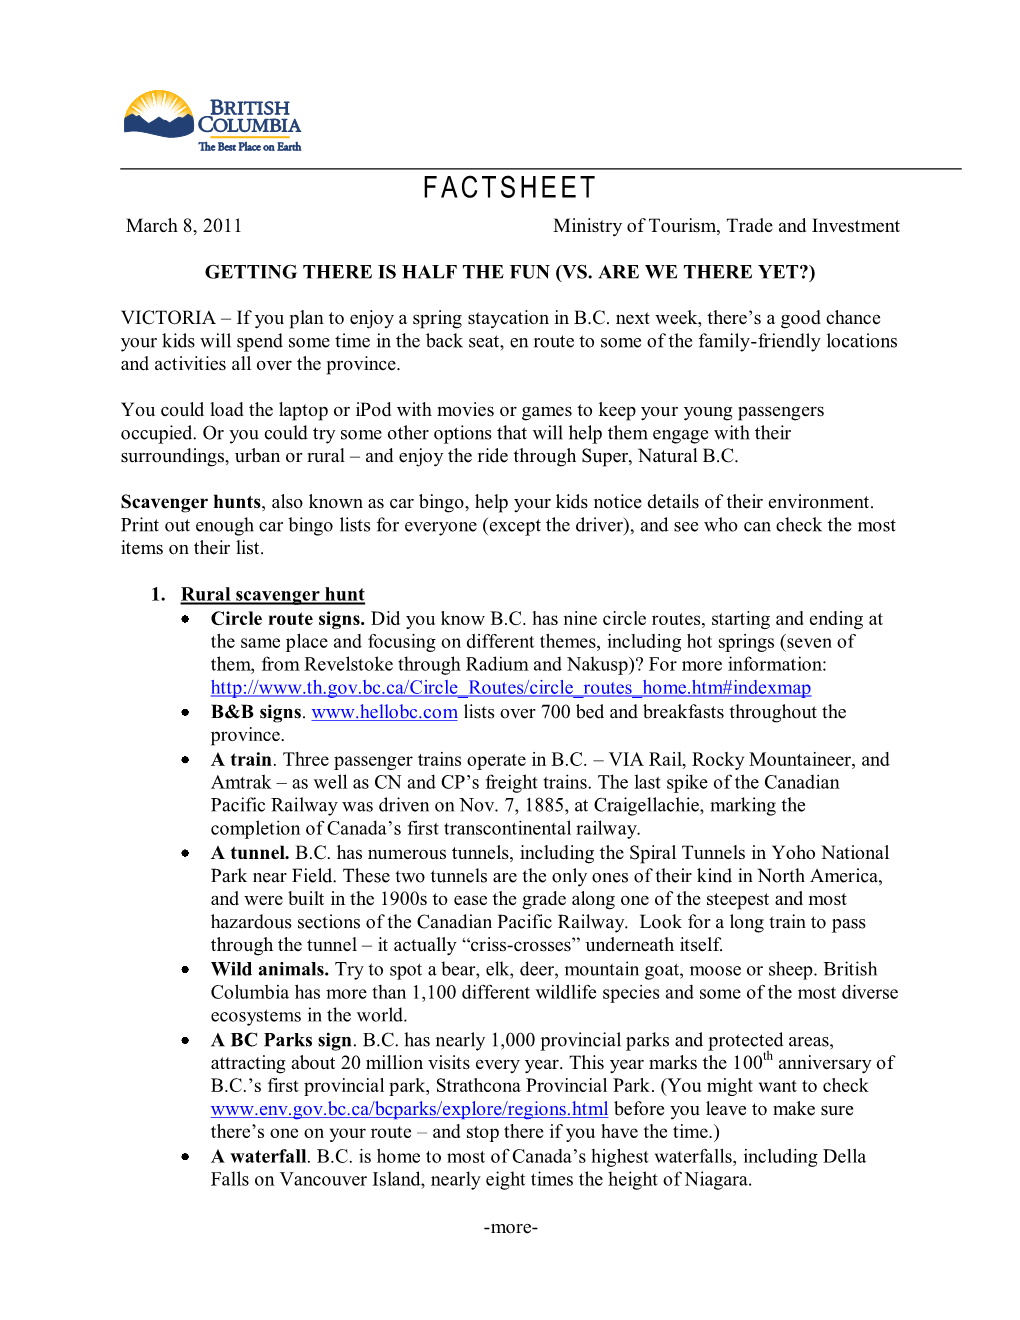 FACTSHEET March 8, 2011 Ministry of Tourism, Trade and Investment